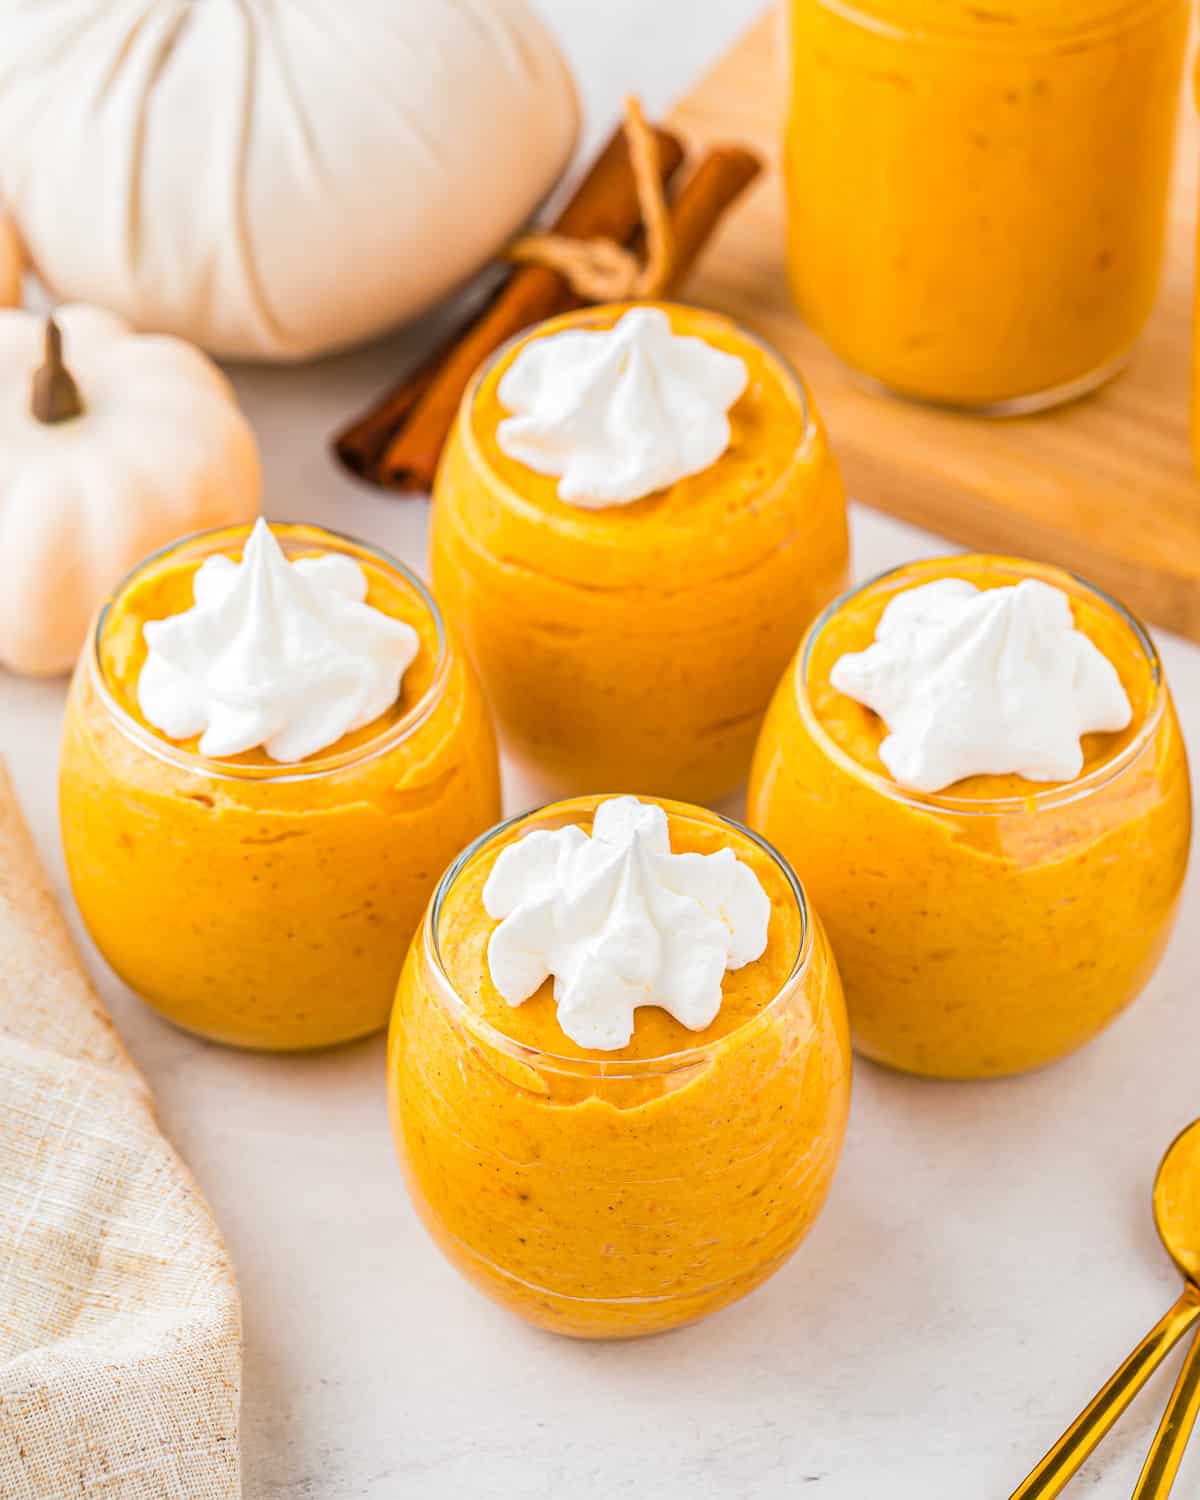 Pumpkin mousse in jars with whipped cream on top.